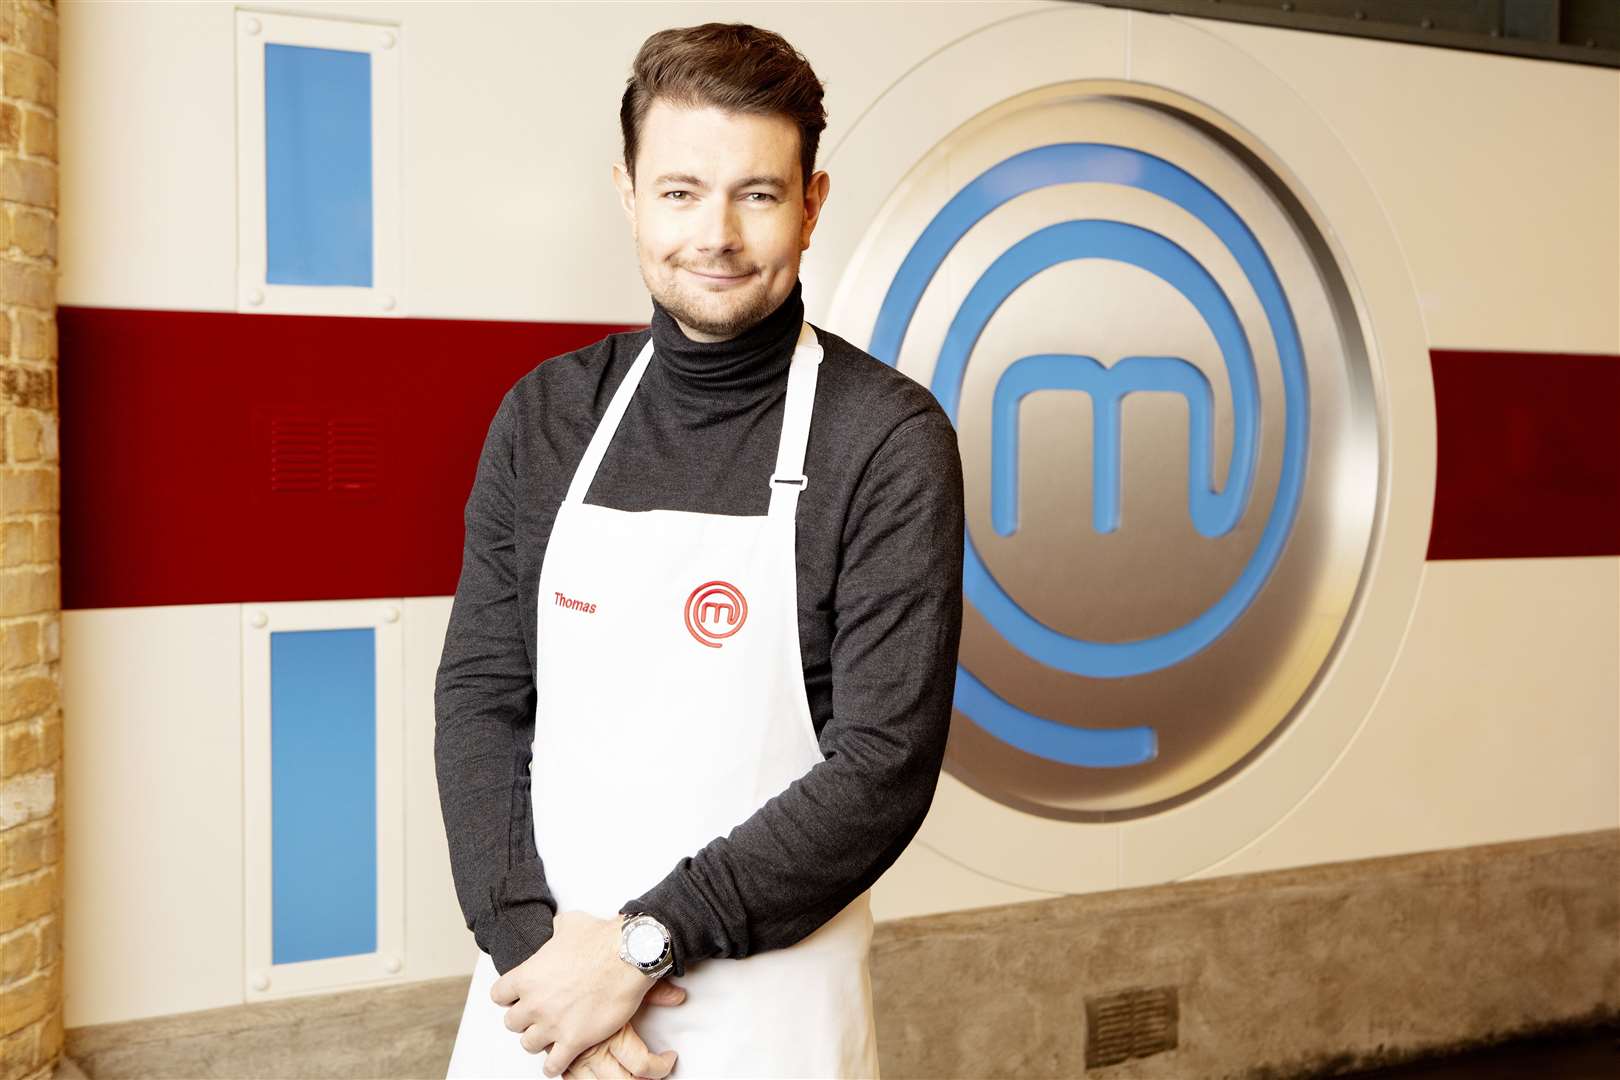 Thomas Frake is one of the finallists on MasterChef. Picture: PlankPR